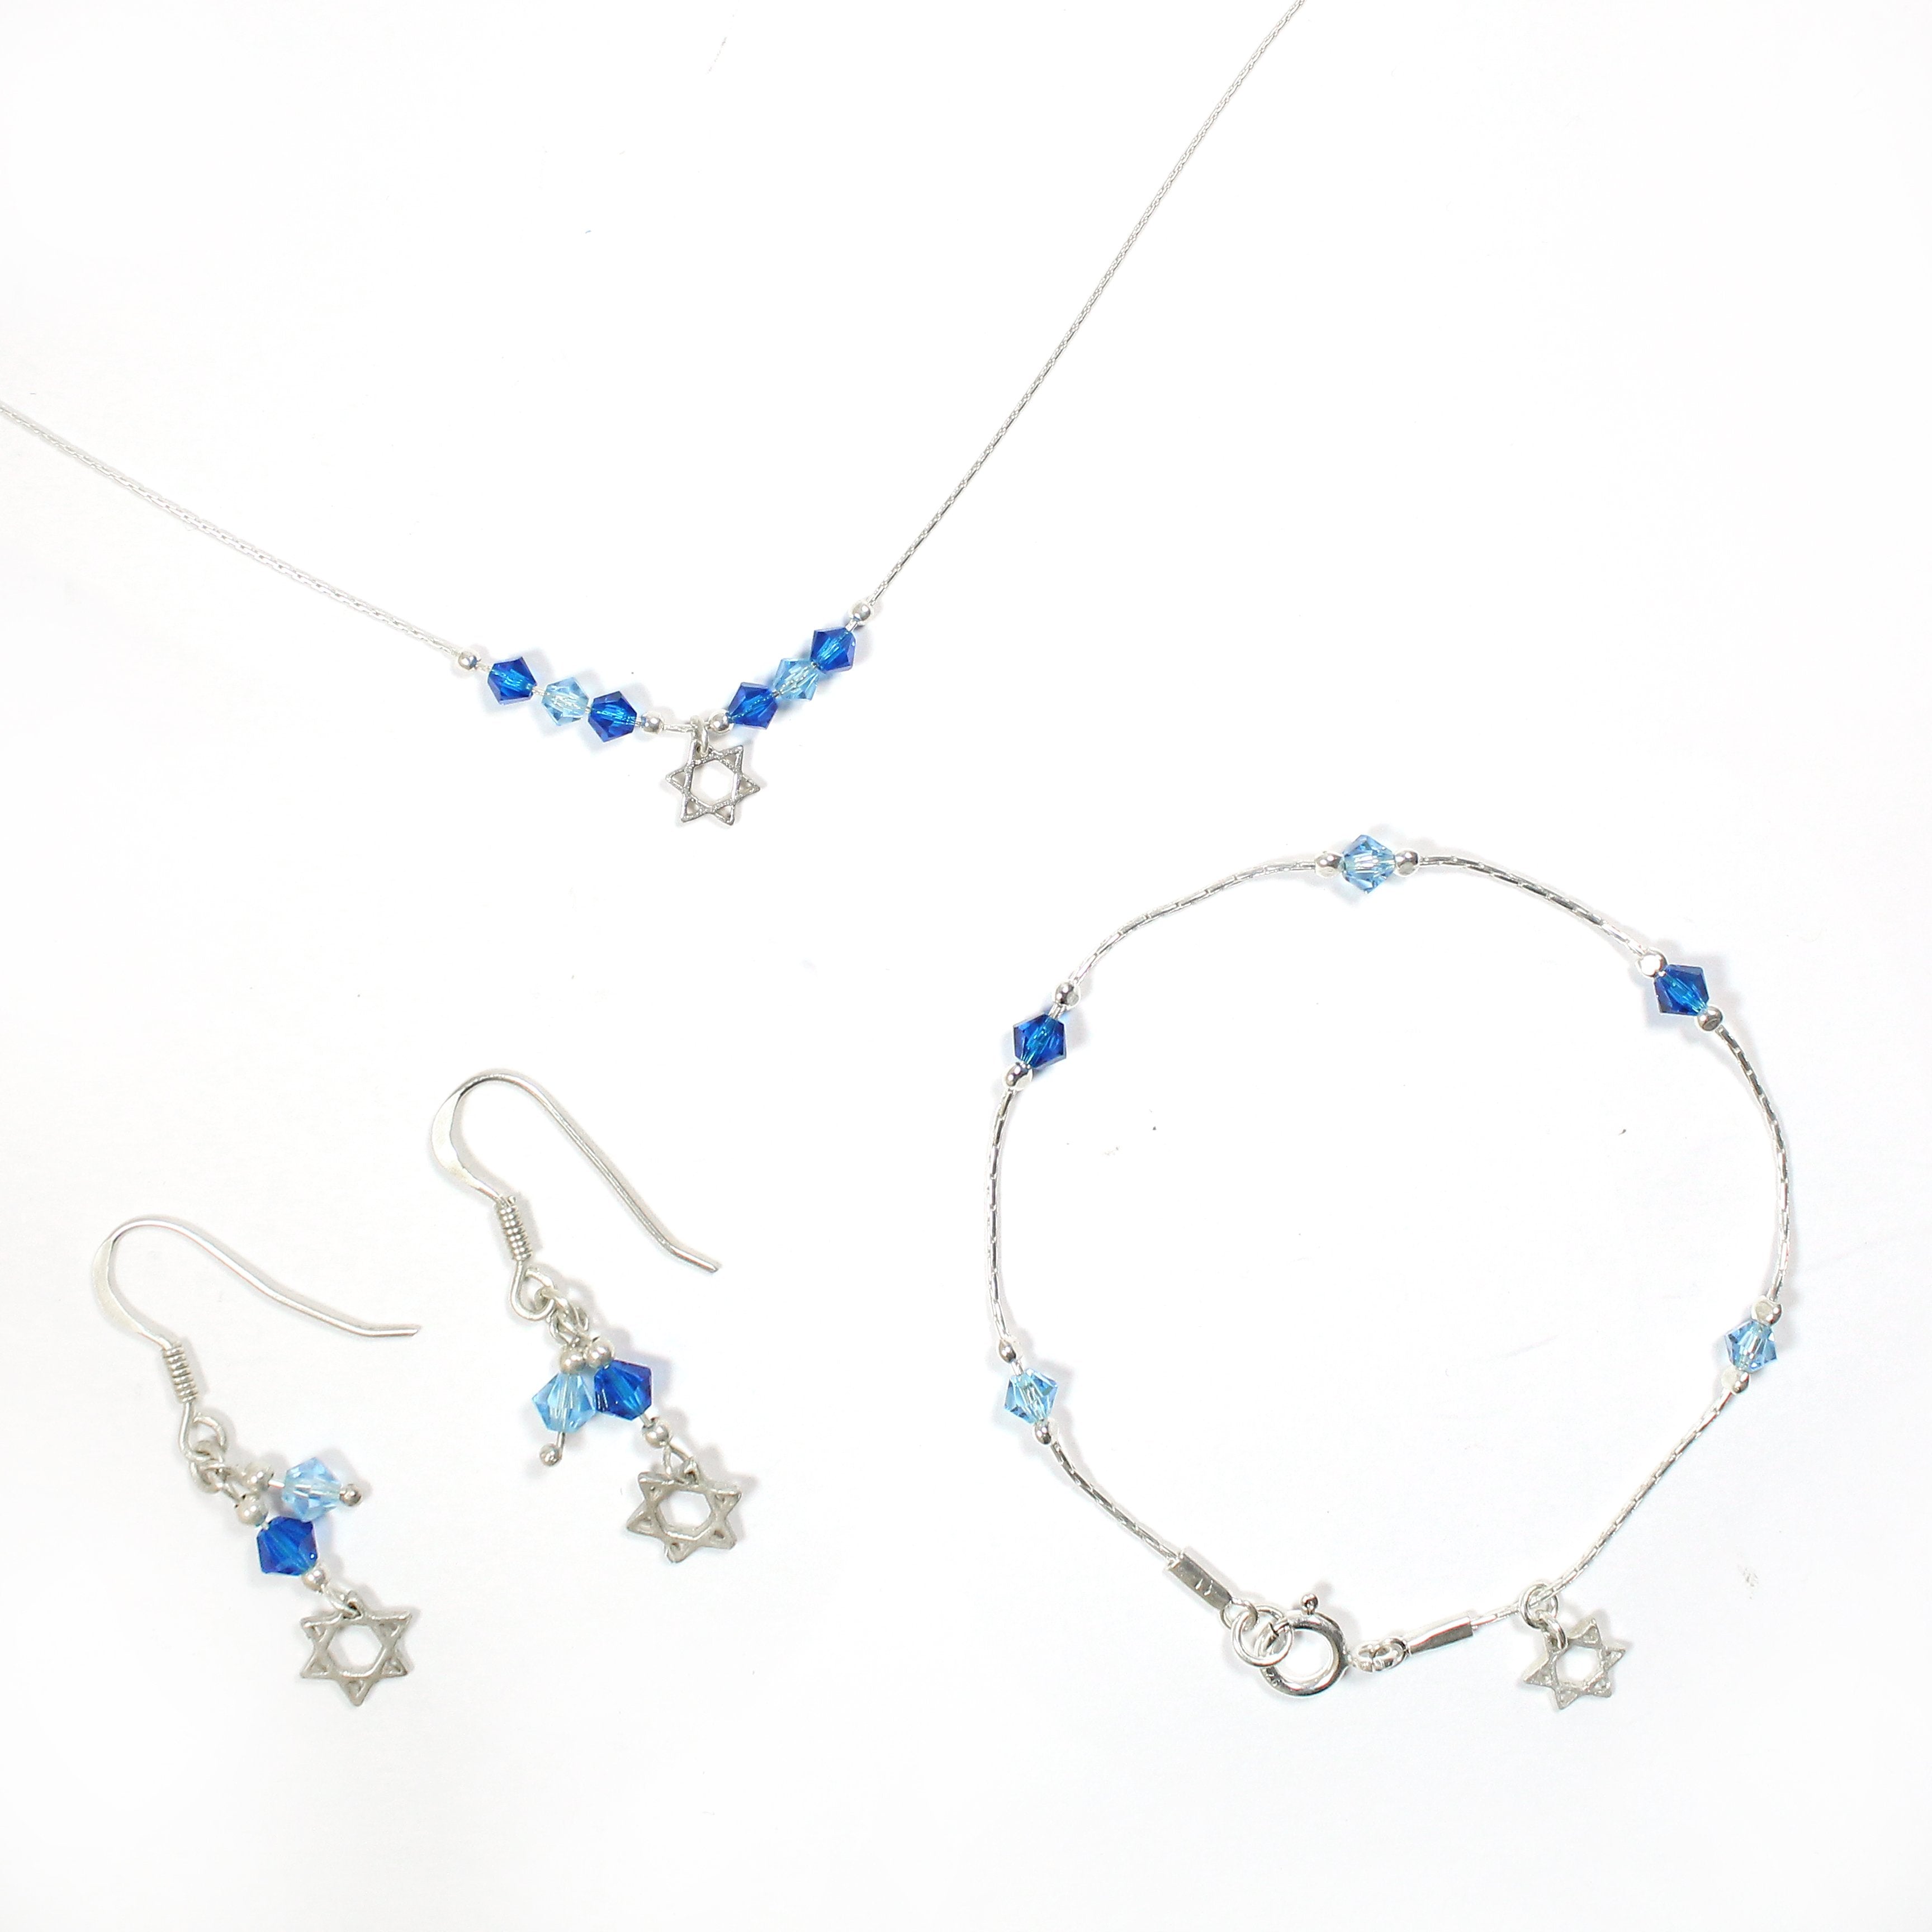 Swarovski and Silver Star of David Jewelry Set - Shulamit Kanter Official Store